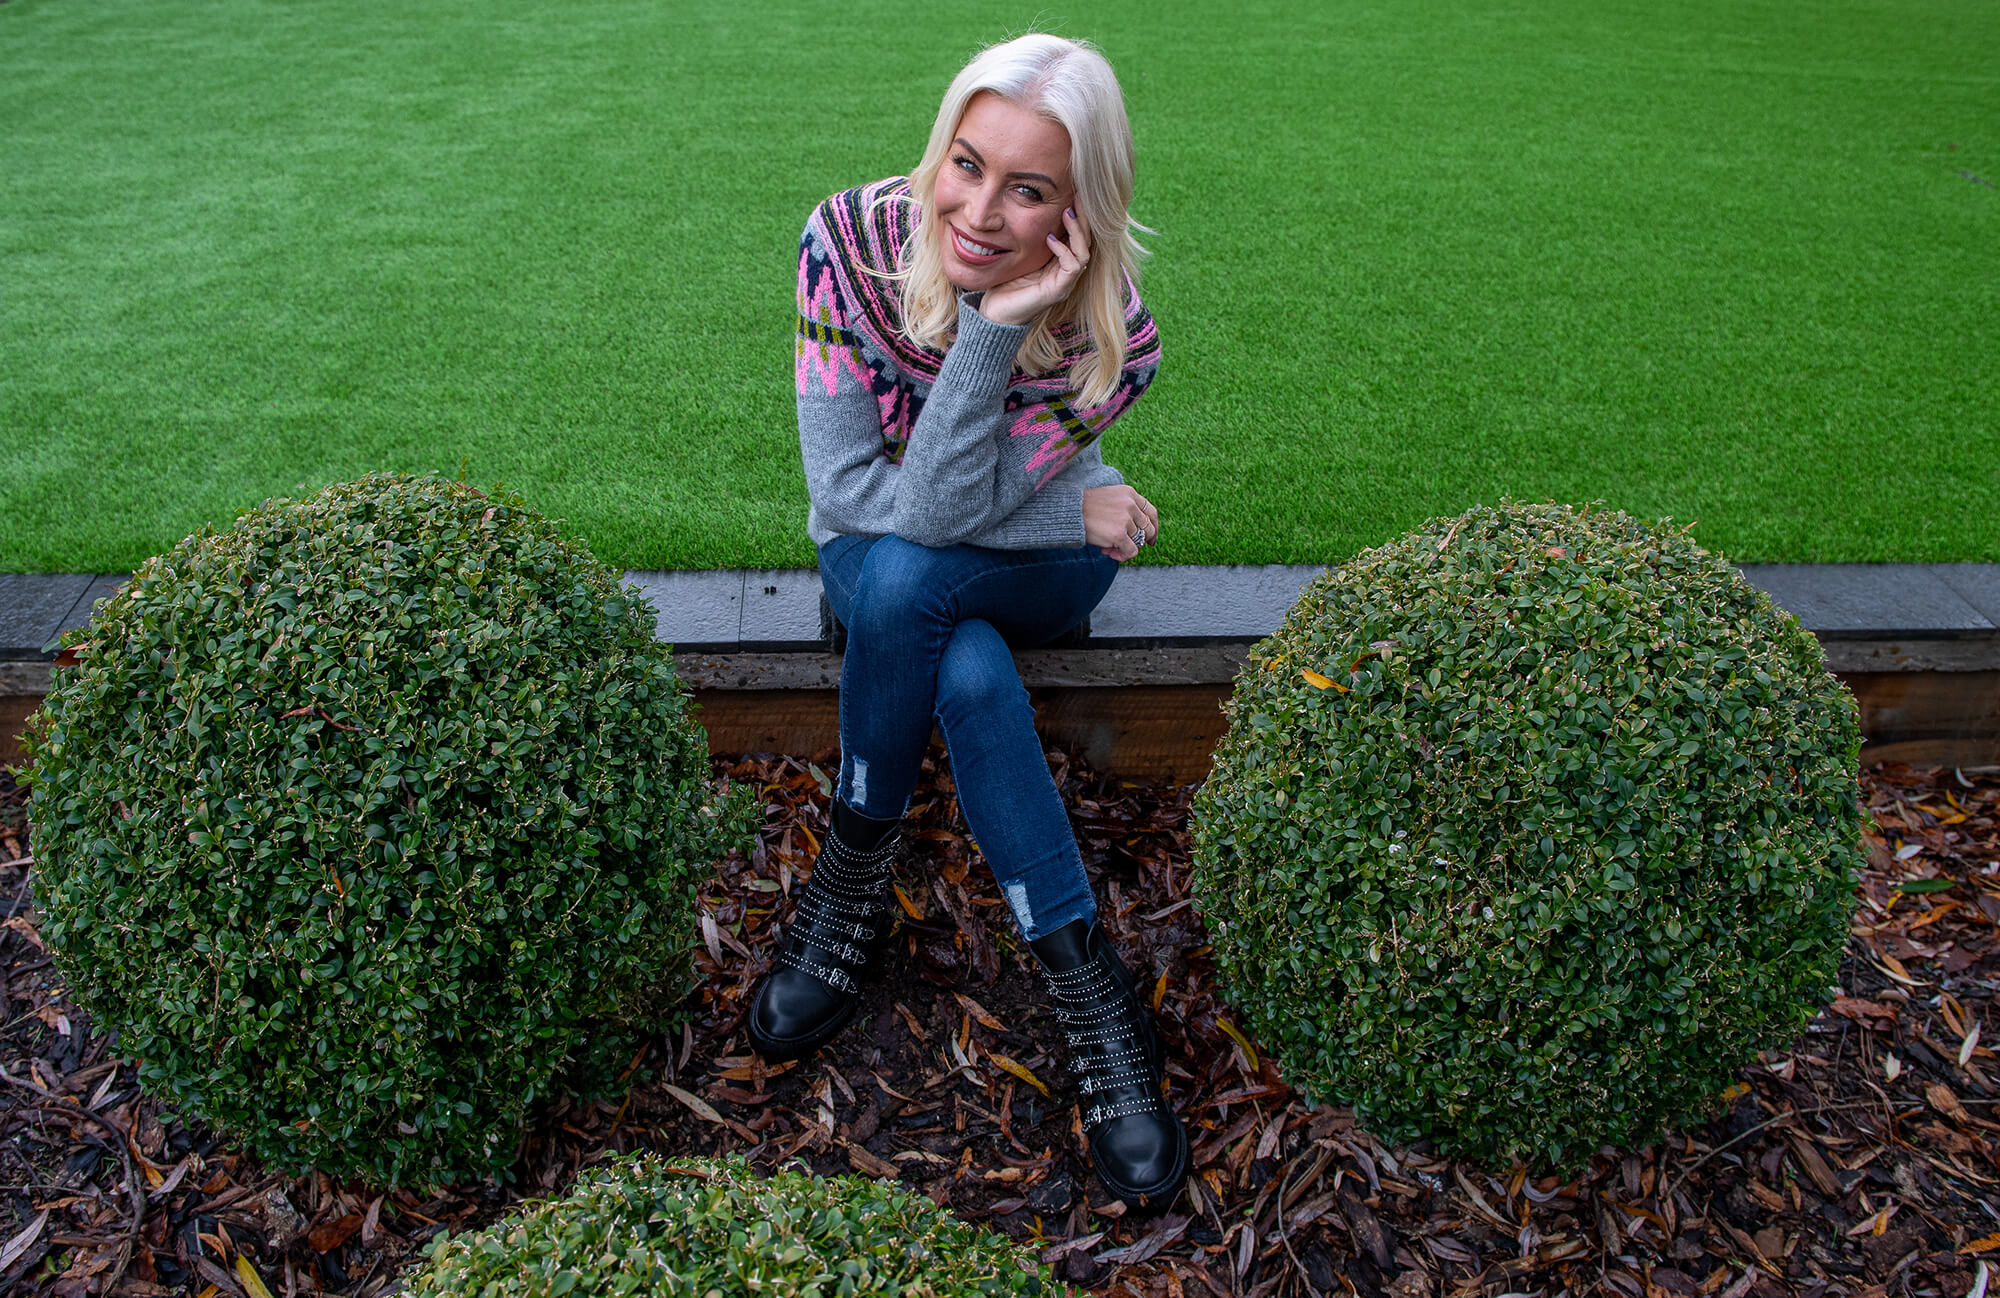 Picture of Denise Van Outen in front of artificial grass for the Big Essex Garden transformation